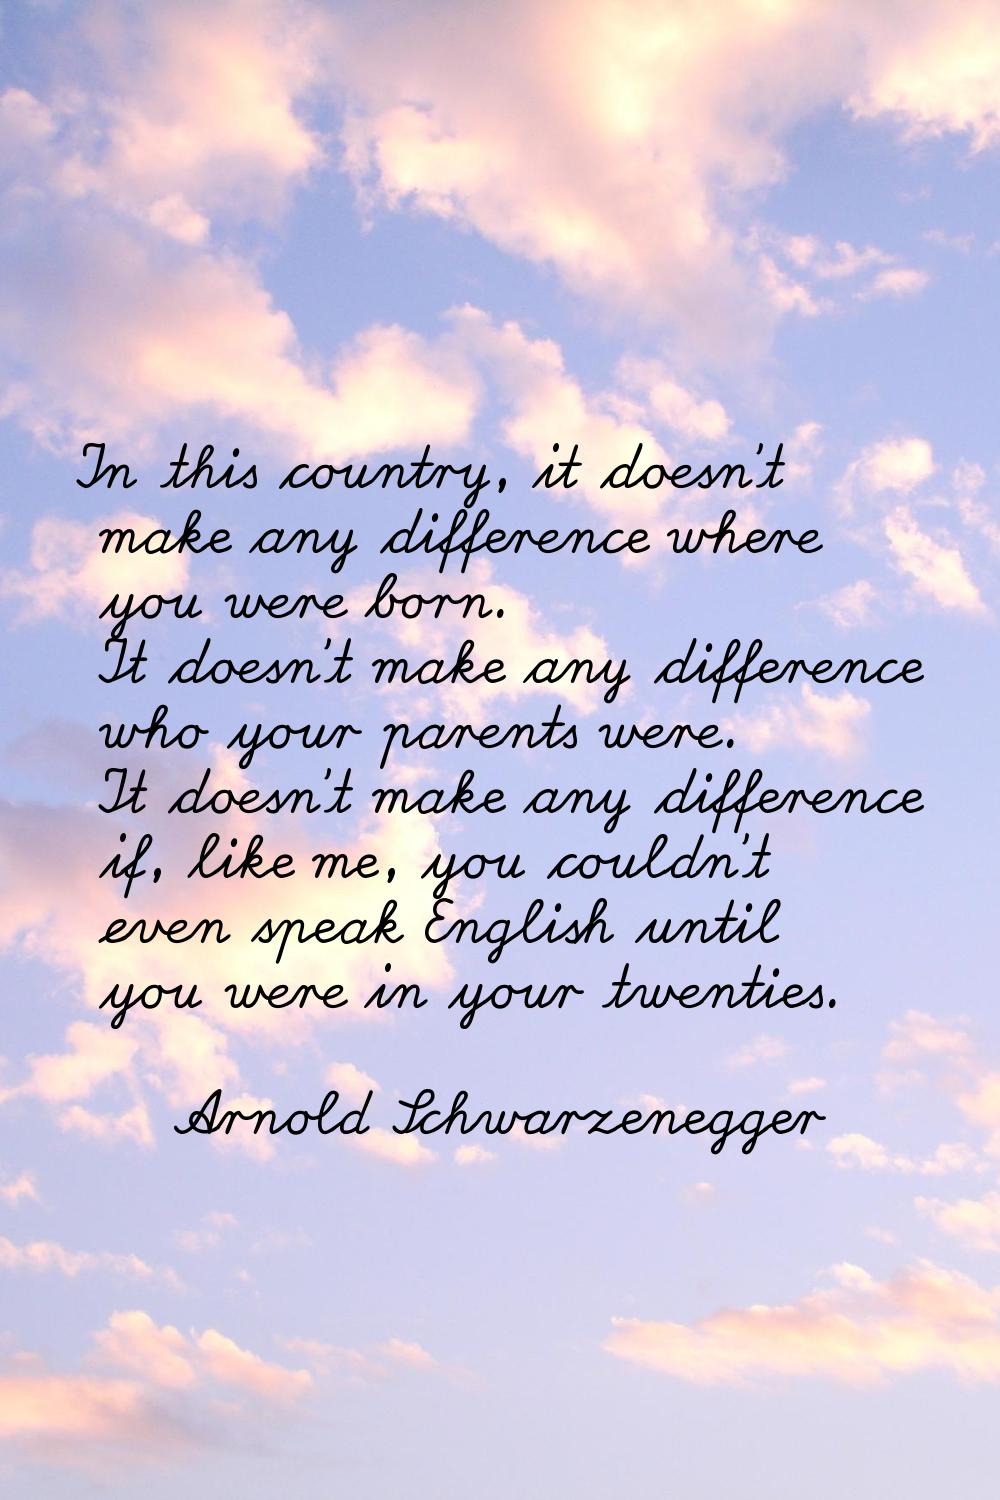 In this country, it doesn't make any difference where you were born. It doesn't make any difference